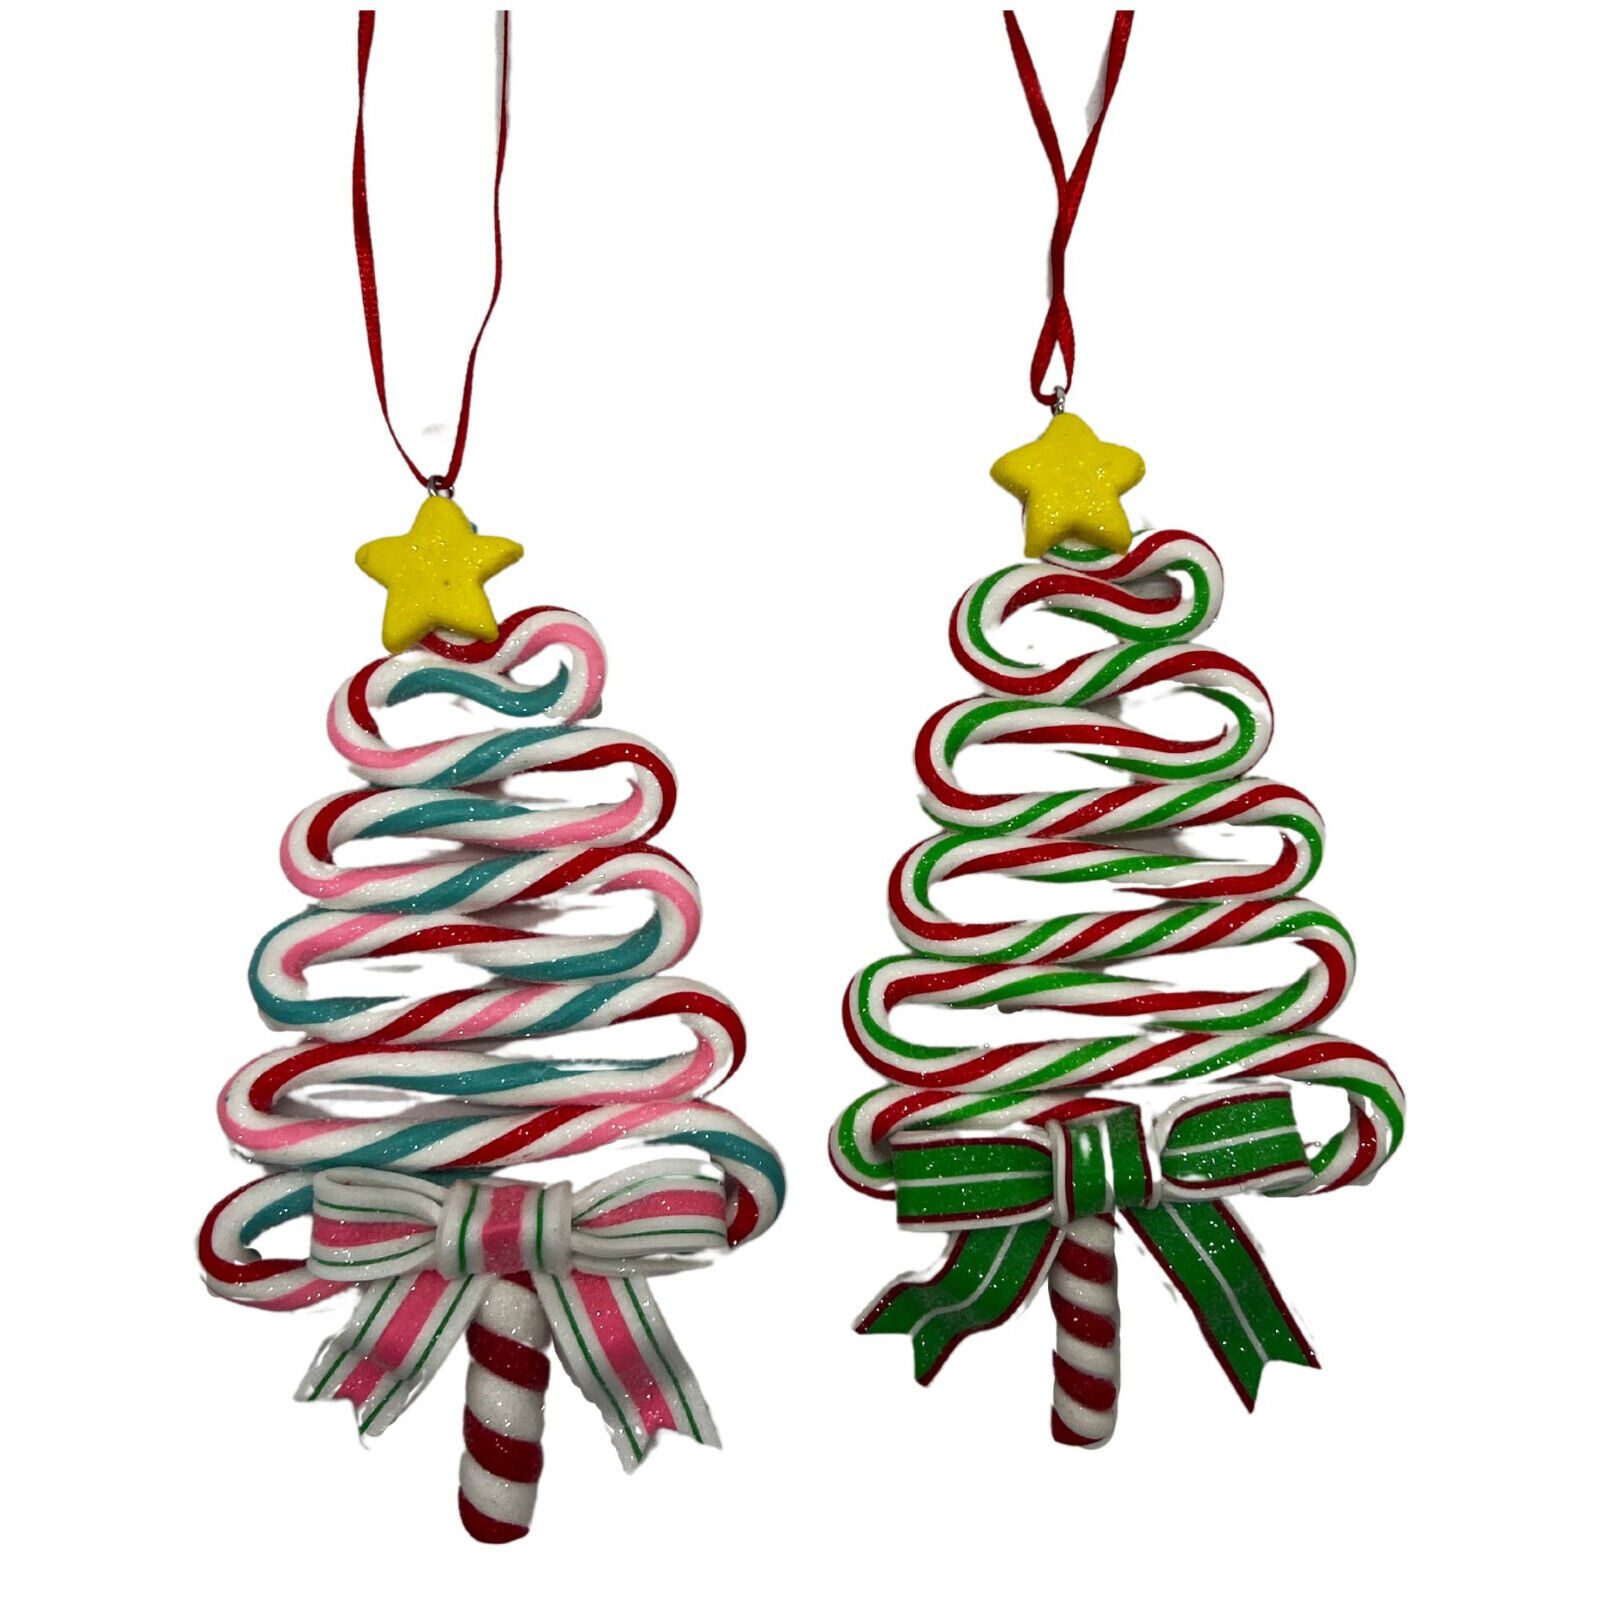 Set of 2 Assorted Clay Shaped Christmas Tree Ornaments, Festive Hanging Ornament